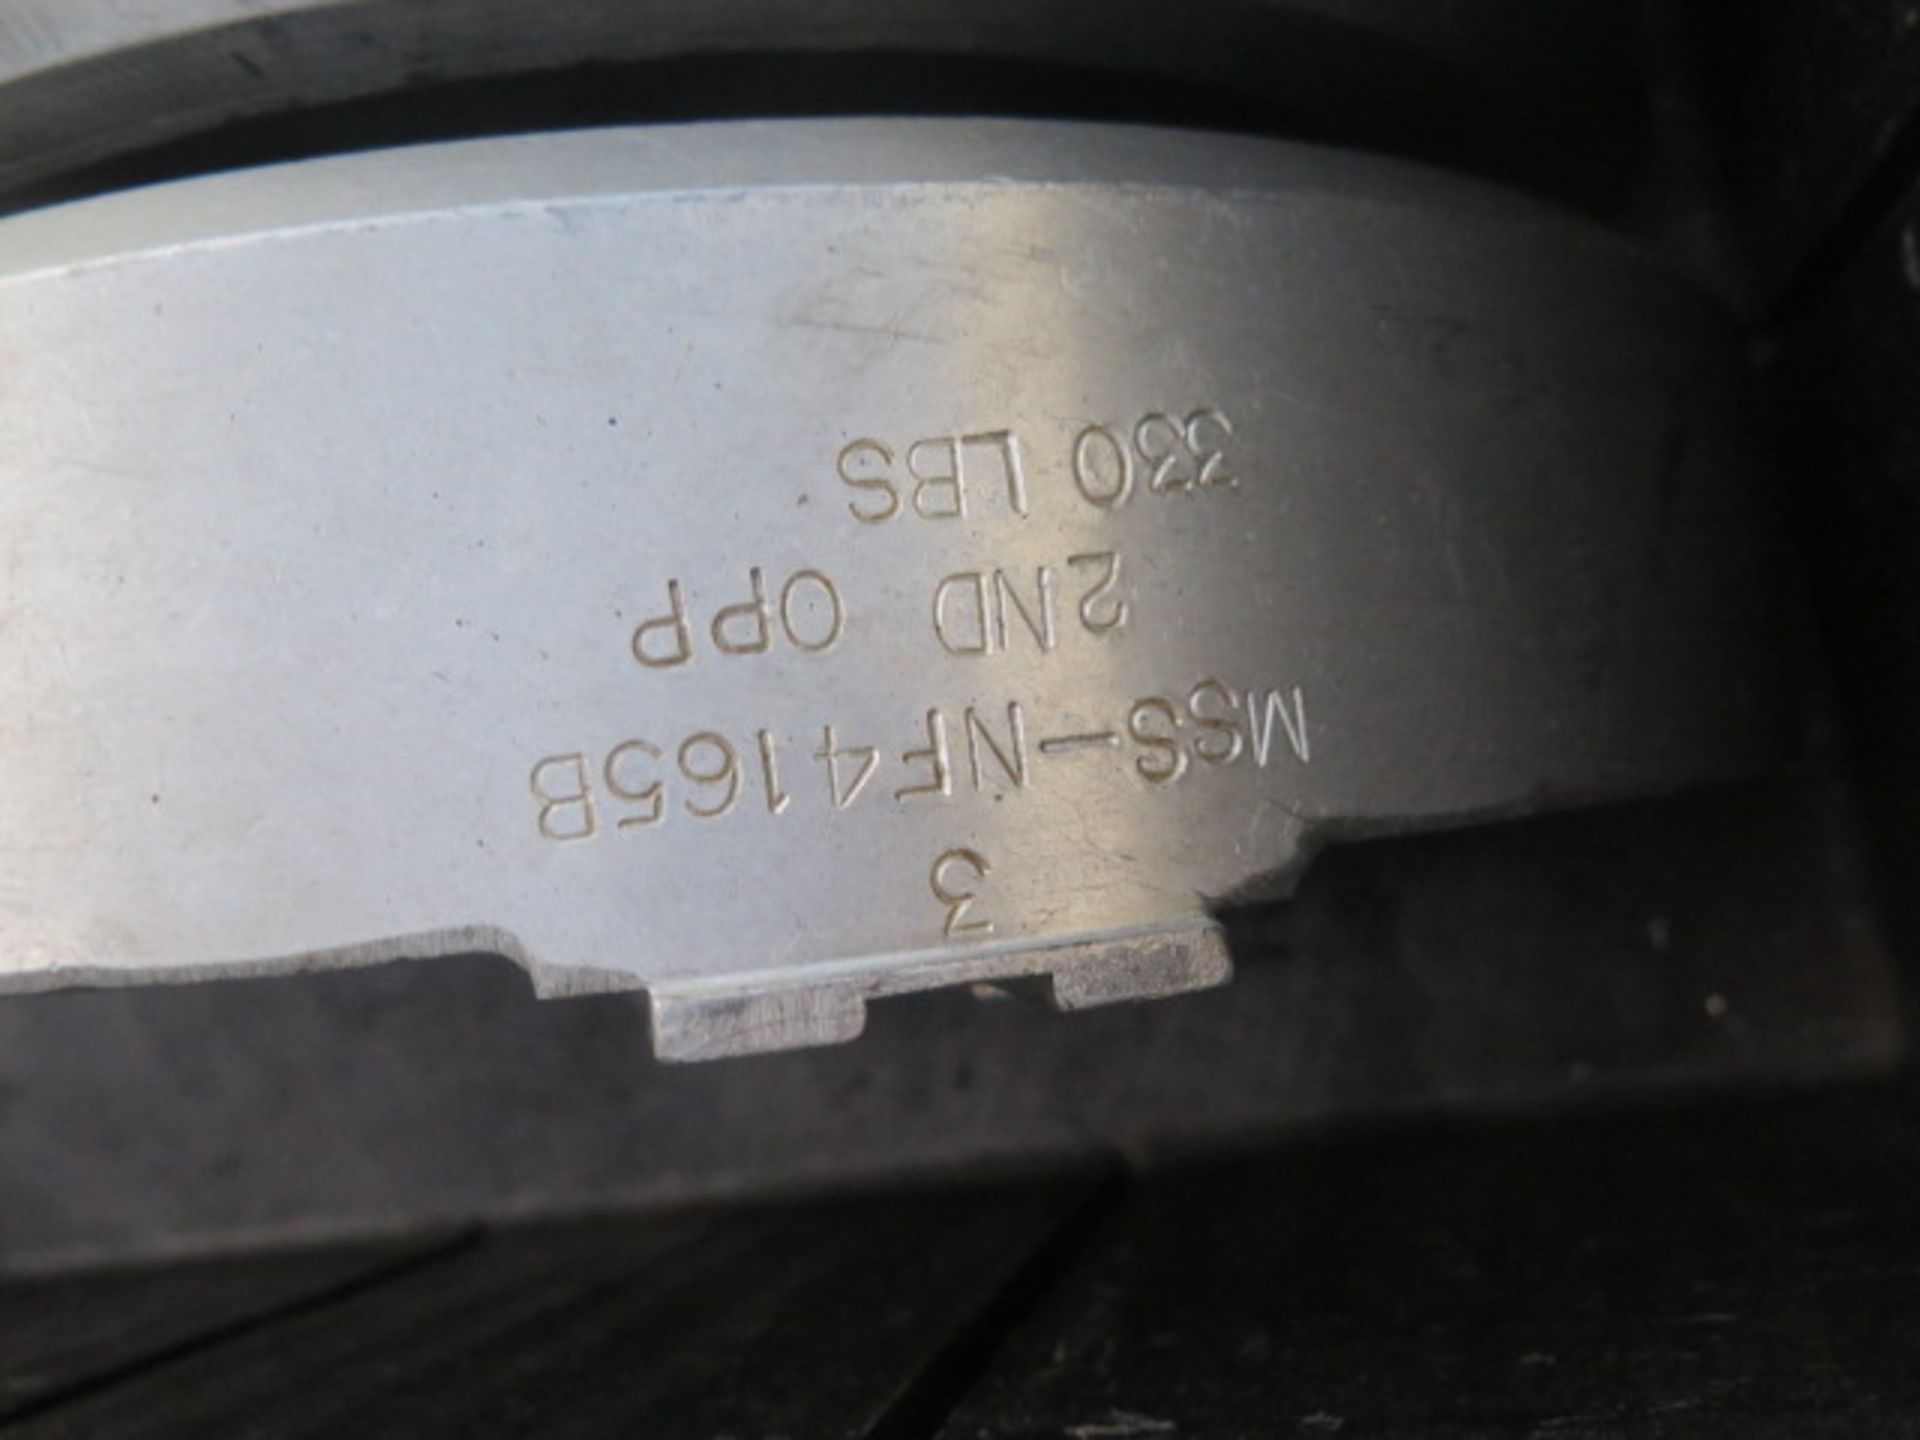 Large Chuck Jaws (SOLD AS-IS - NO WARRANTY) - Image 6 of 9